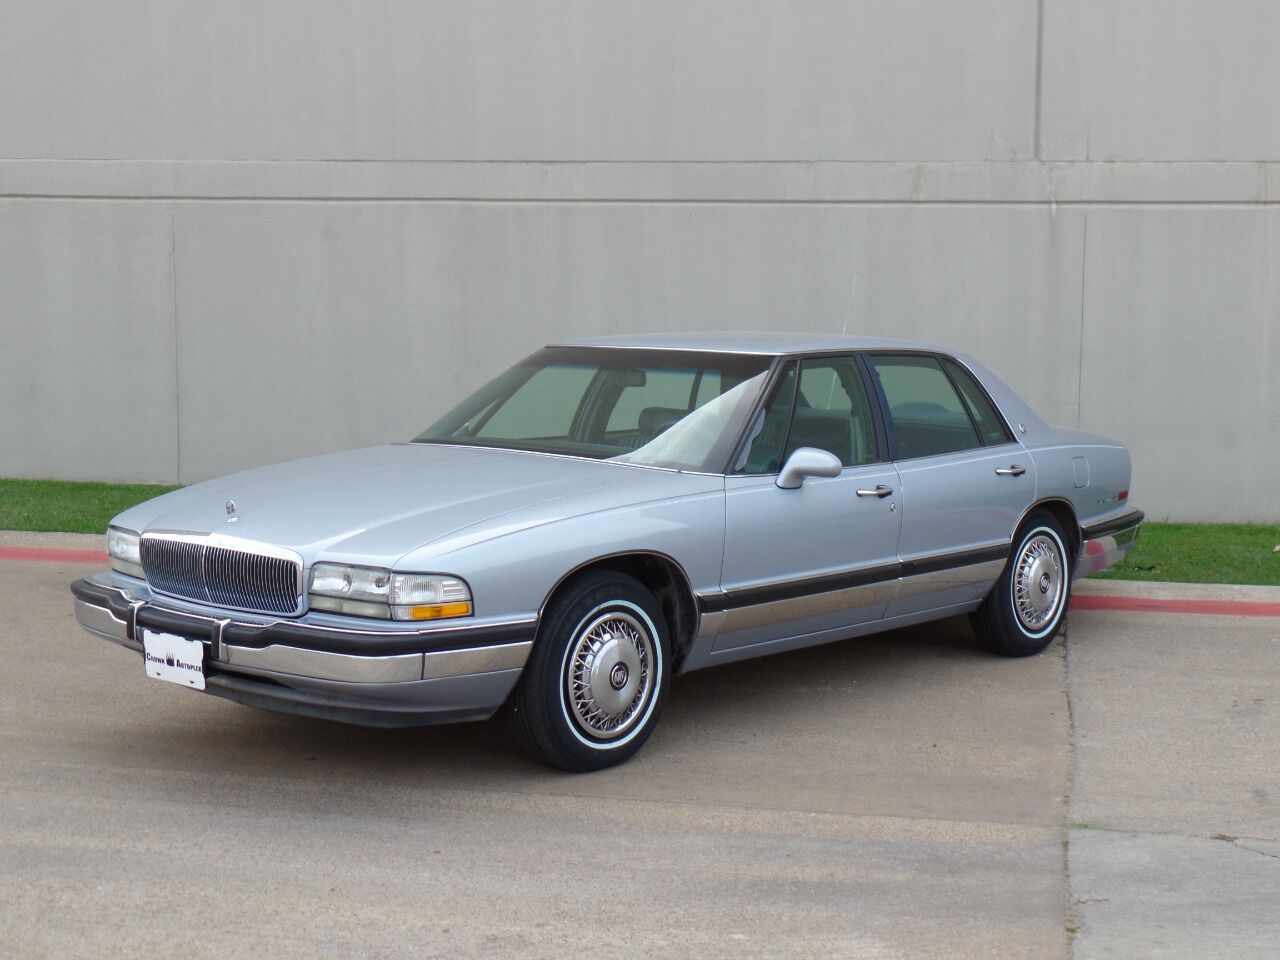 Buick Park Avenue For Sale In Texas - Carsforsale.com®